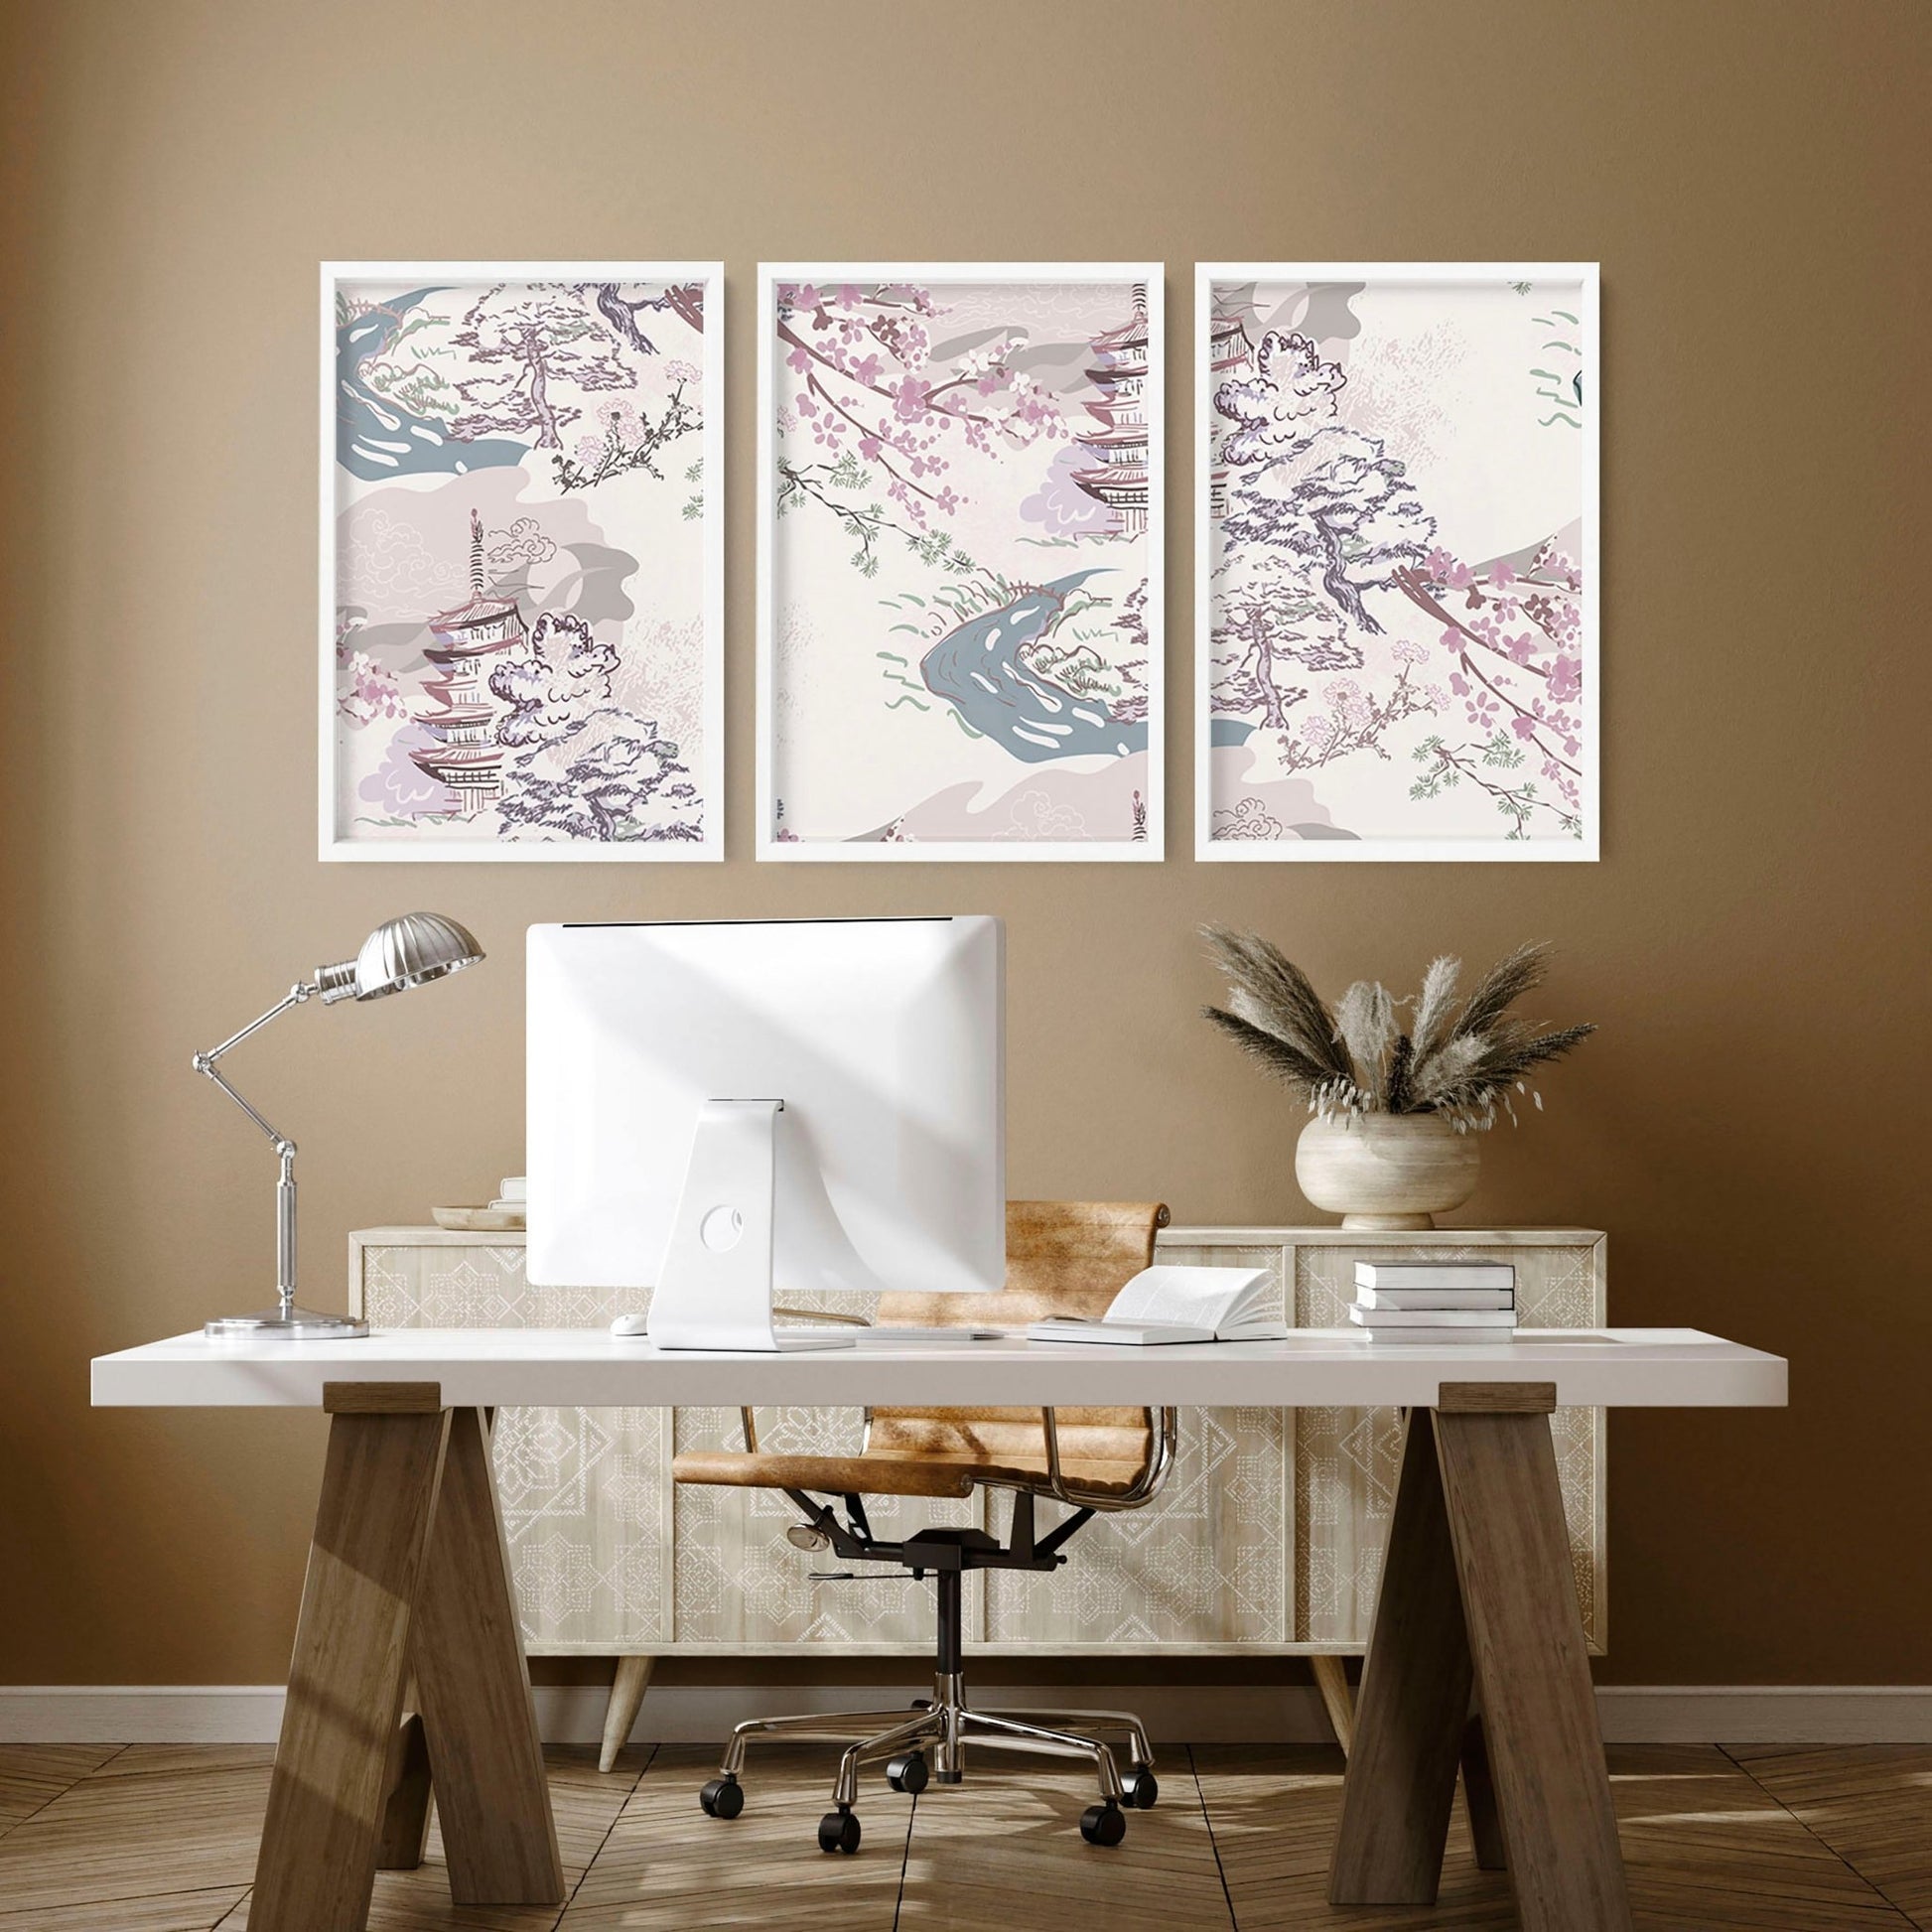 Chinoiserie wall art for home office decor | set of 3 framed wall art